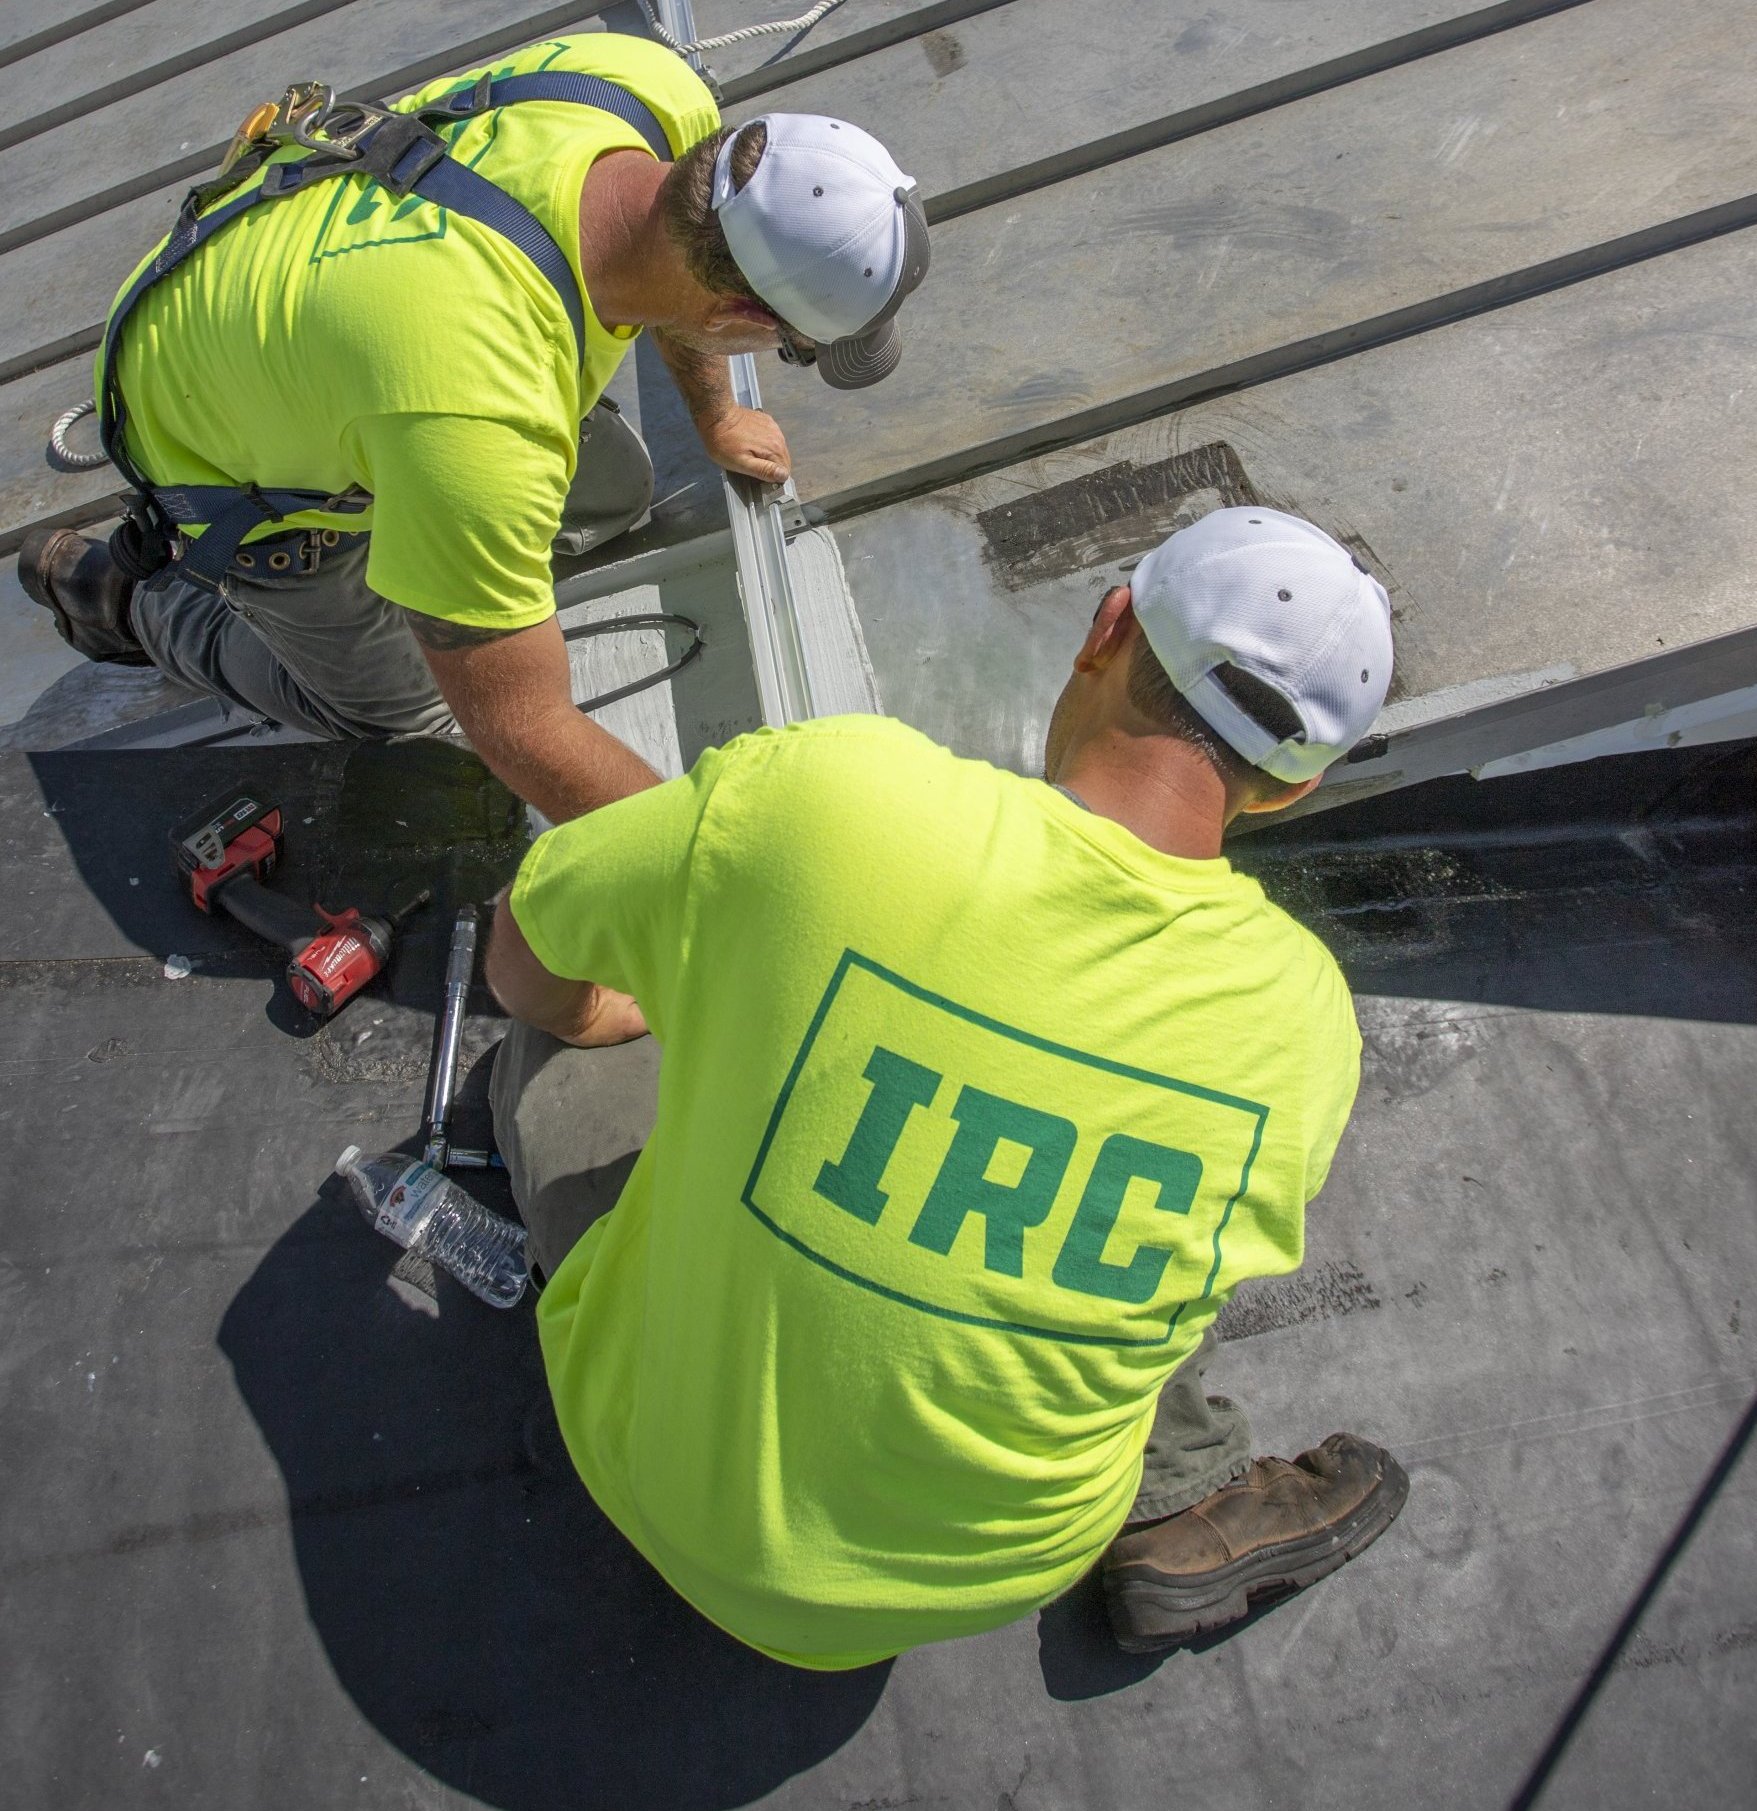 Two roofing technicians installing a new part on a roof